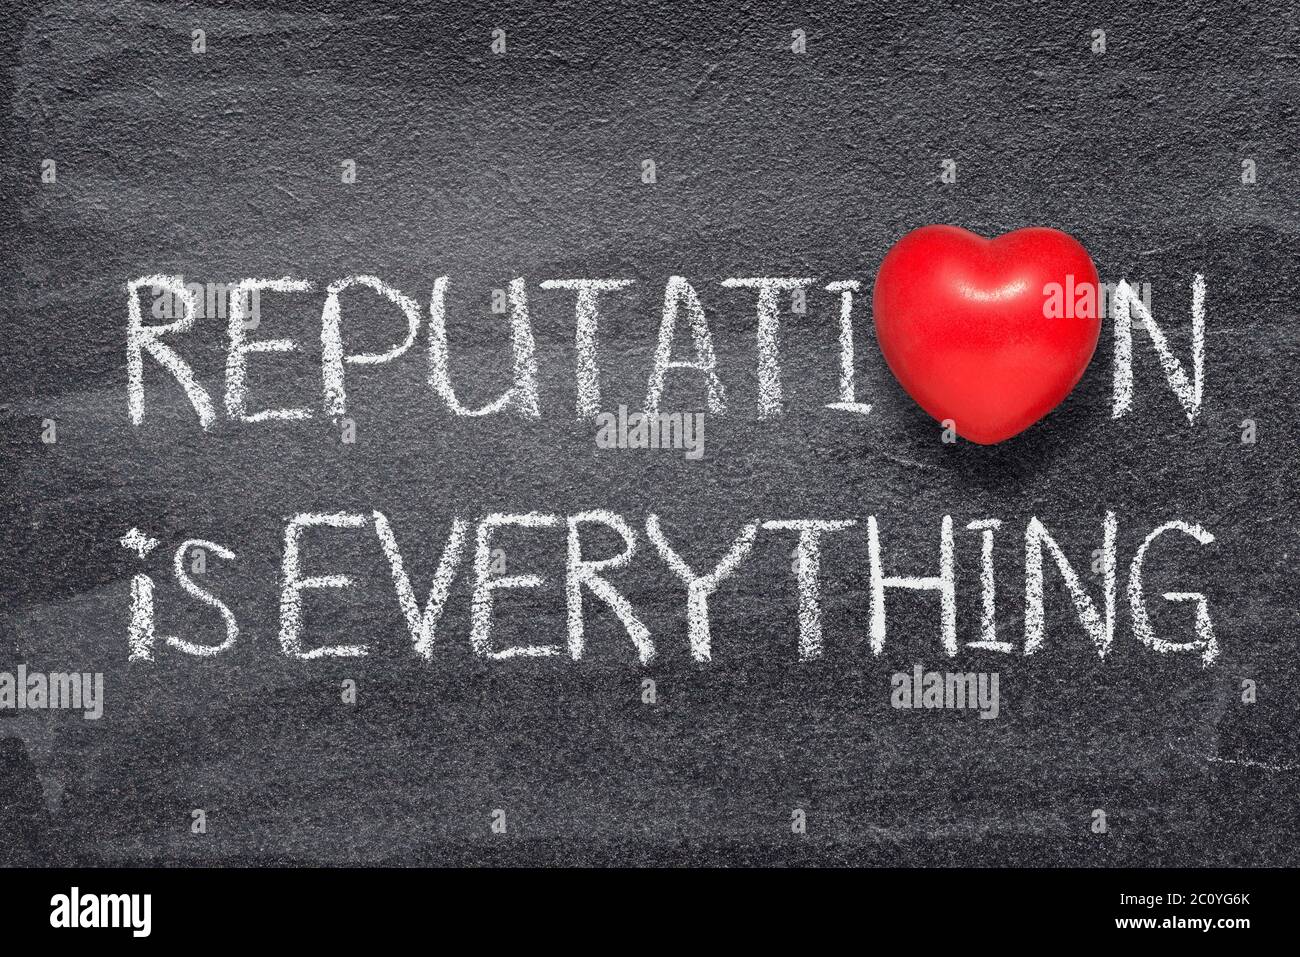 reputation is everything phrase written on chalkboard with red heart symbol Stock Photo